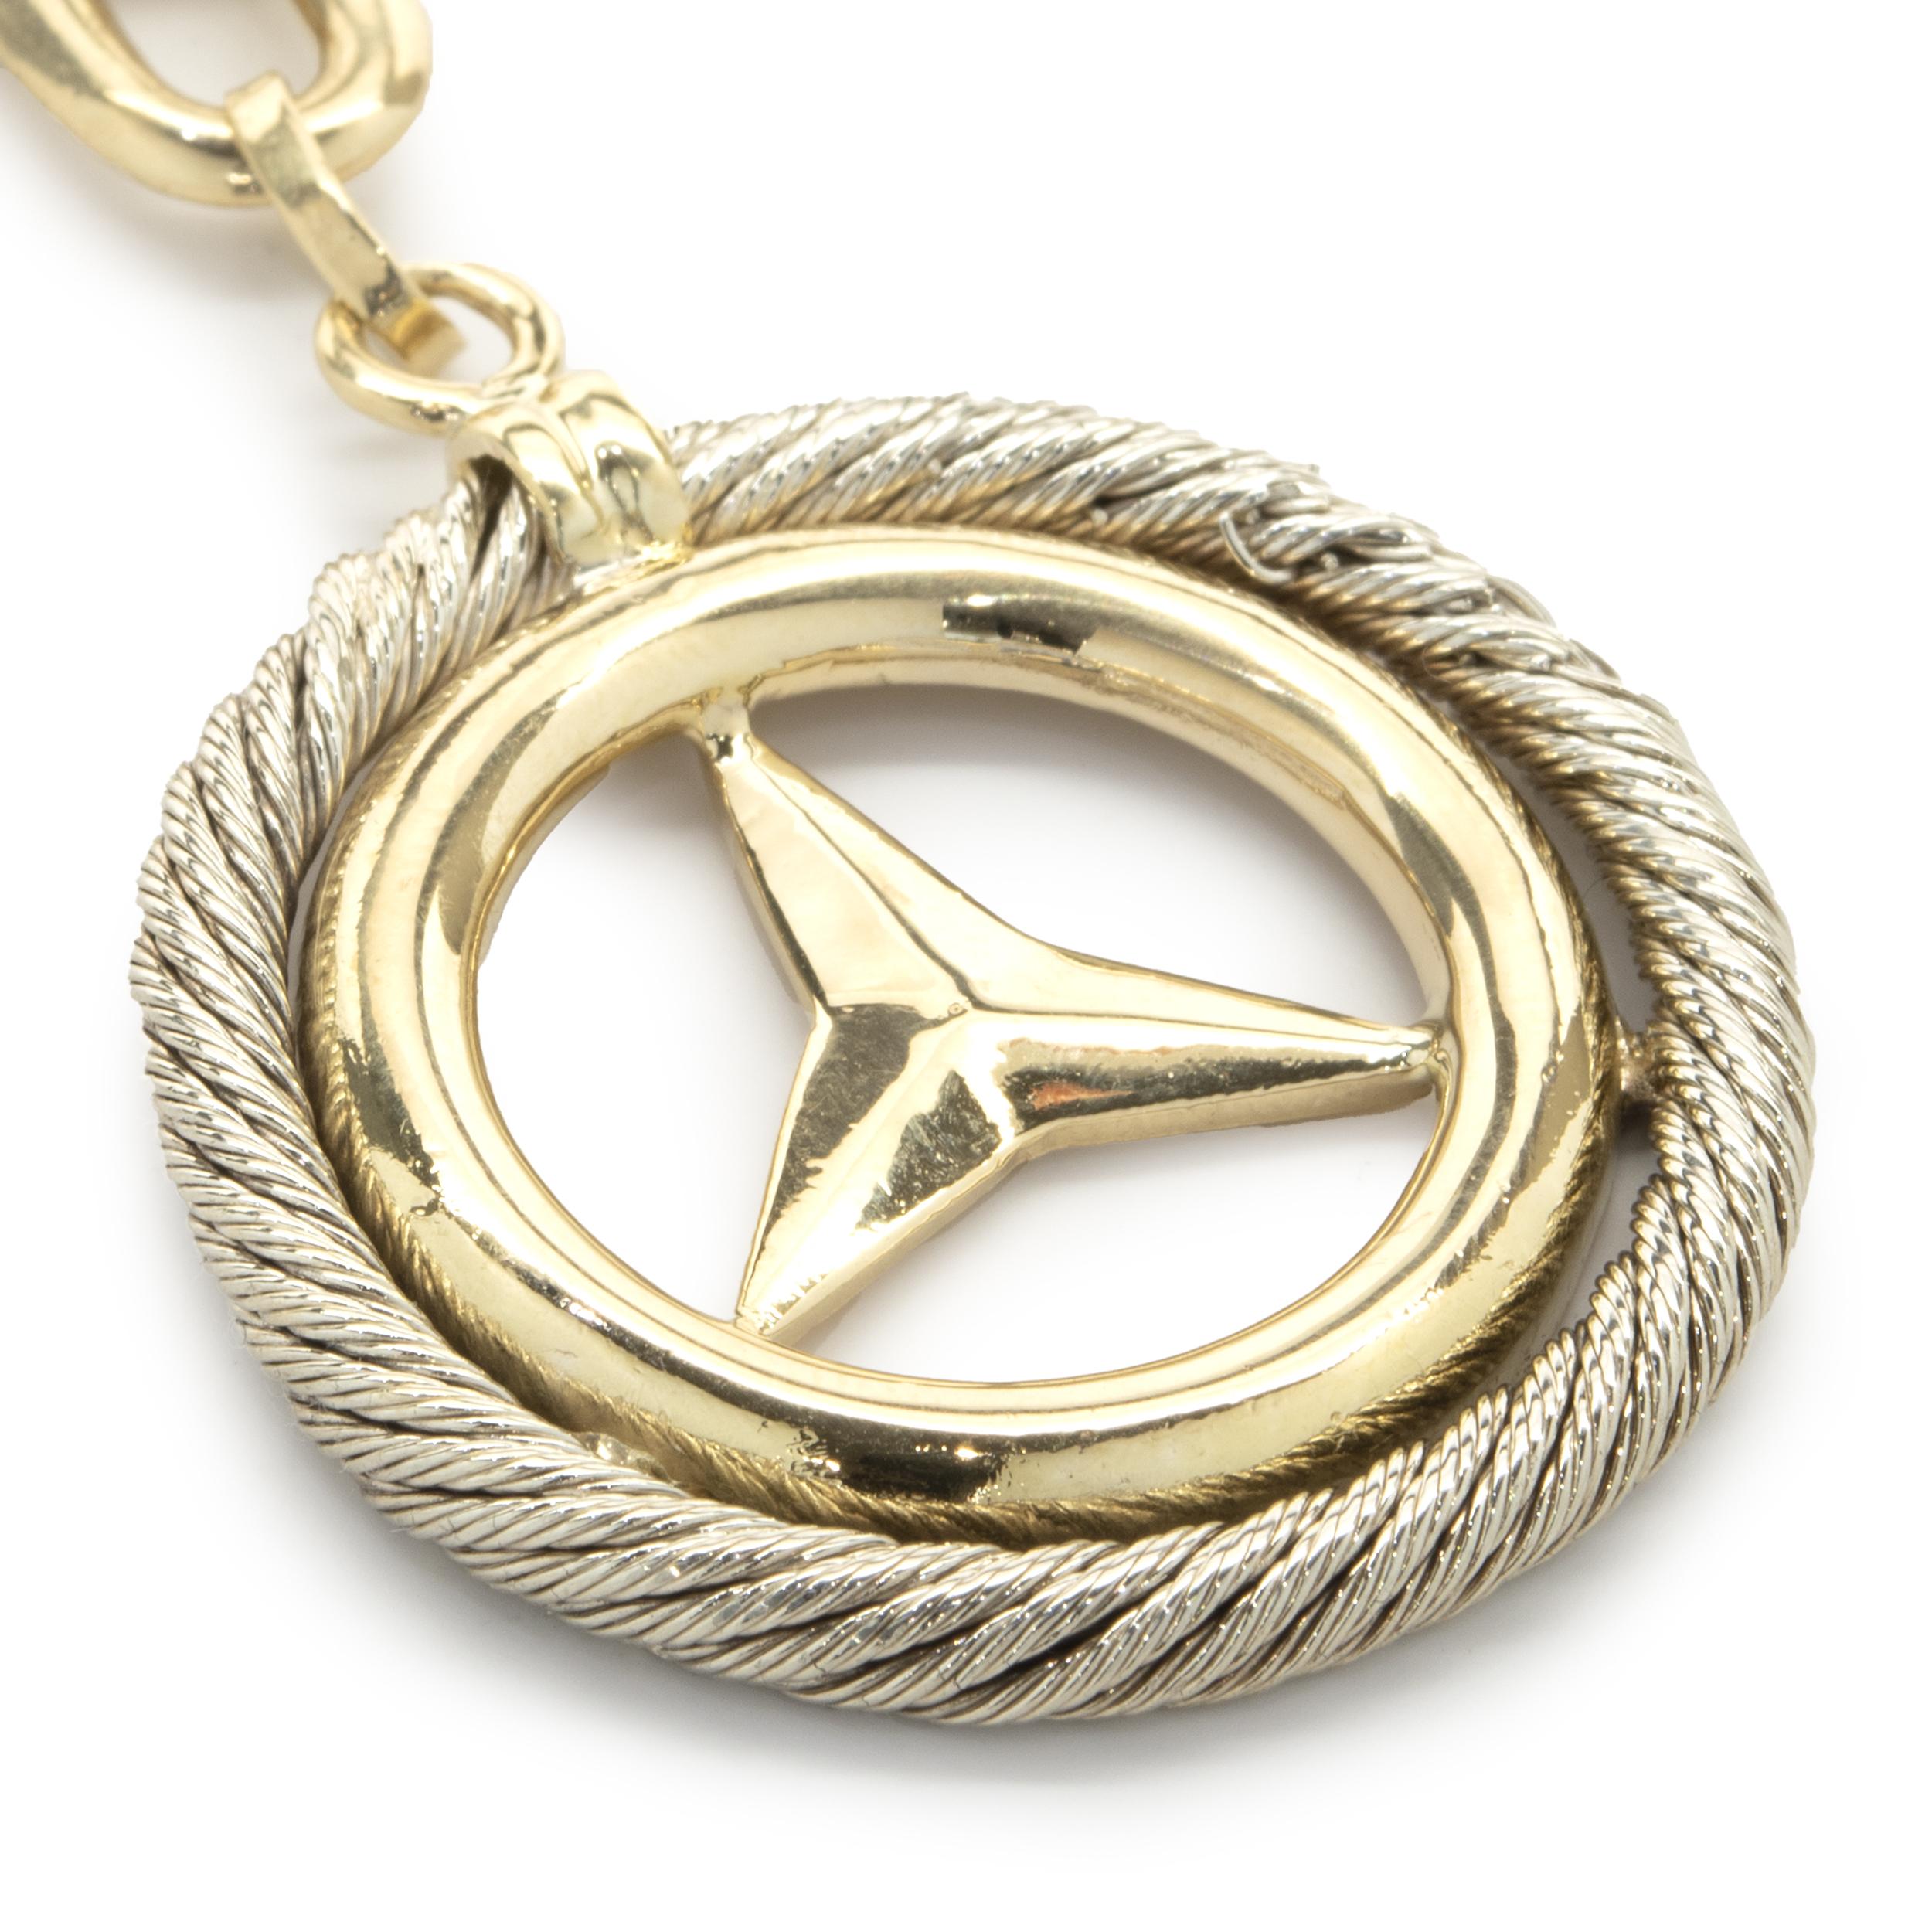 Designer: Mercedes
Material: 18K yellow & white gold
Weight: 27.27 grams
Dimensions: key ring measures 3.5 x 1.5-inches 